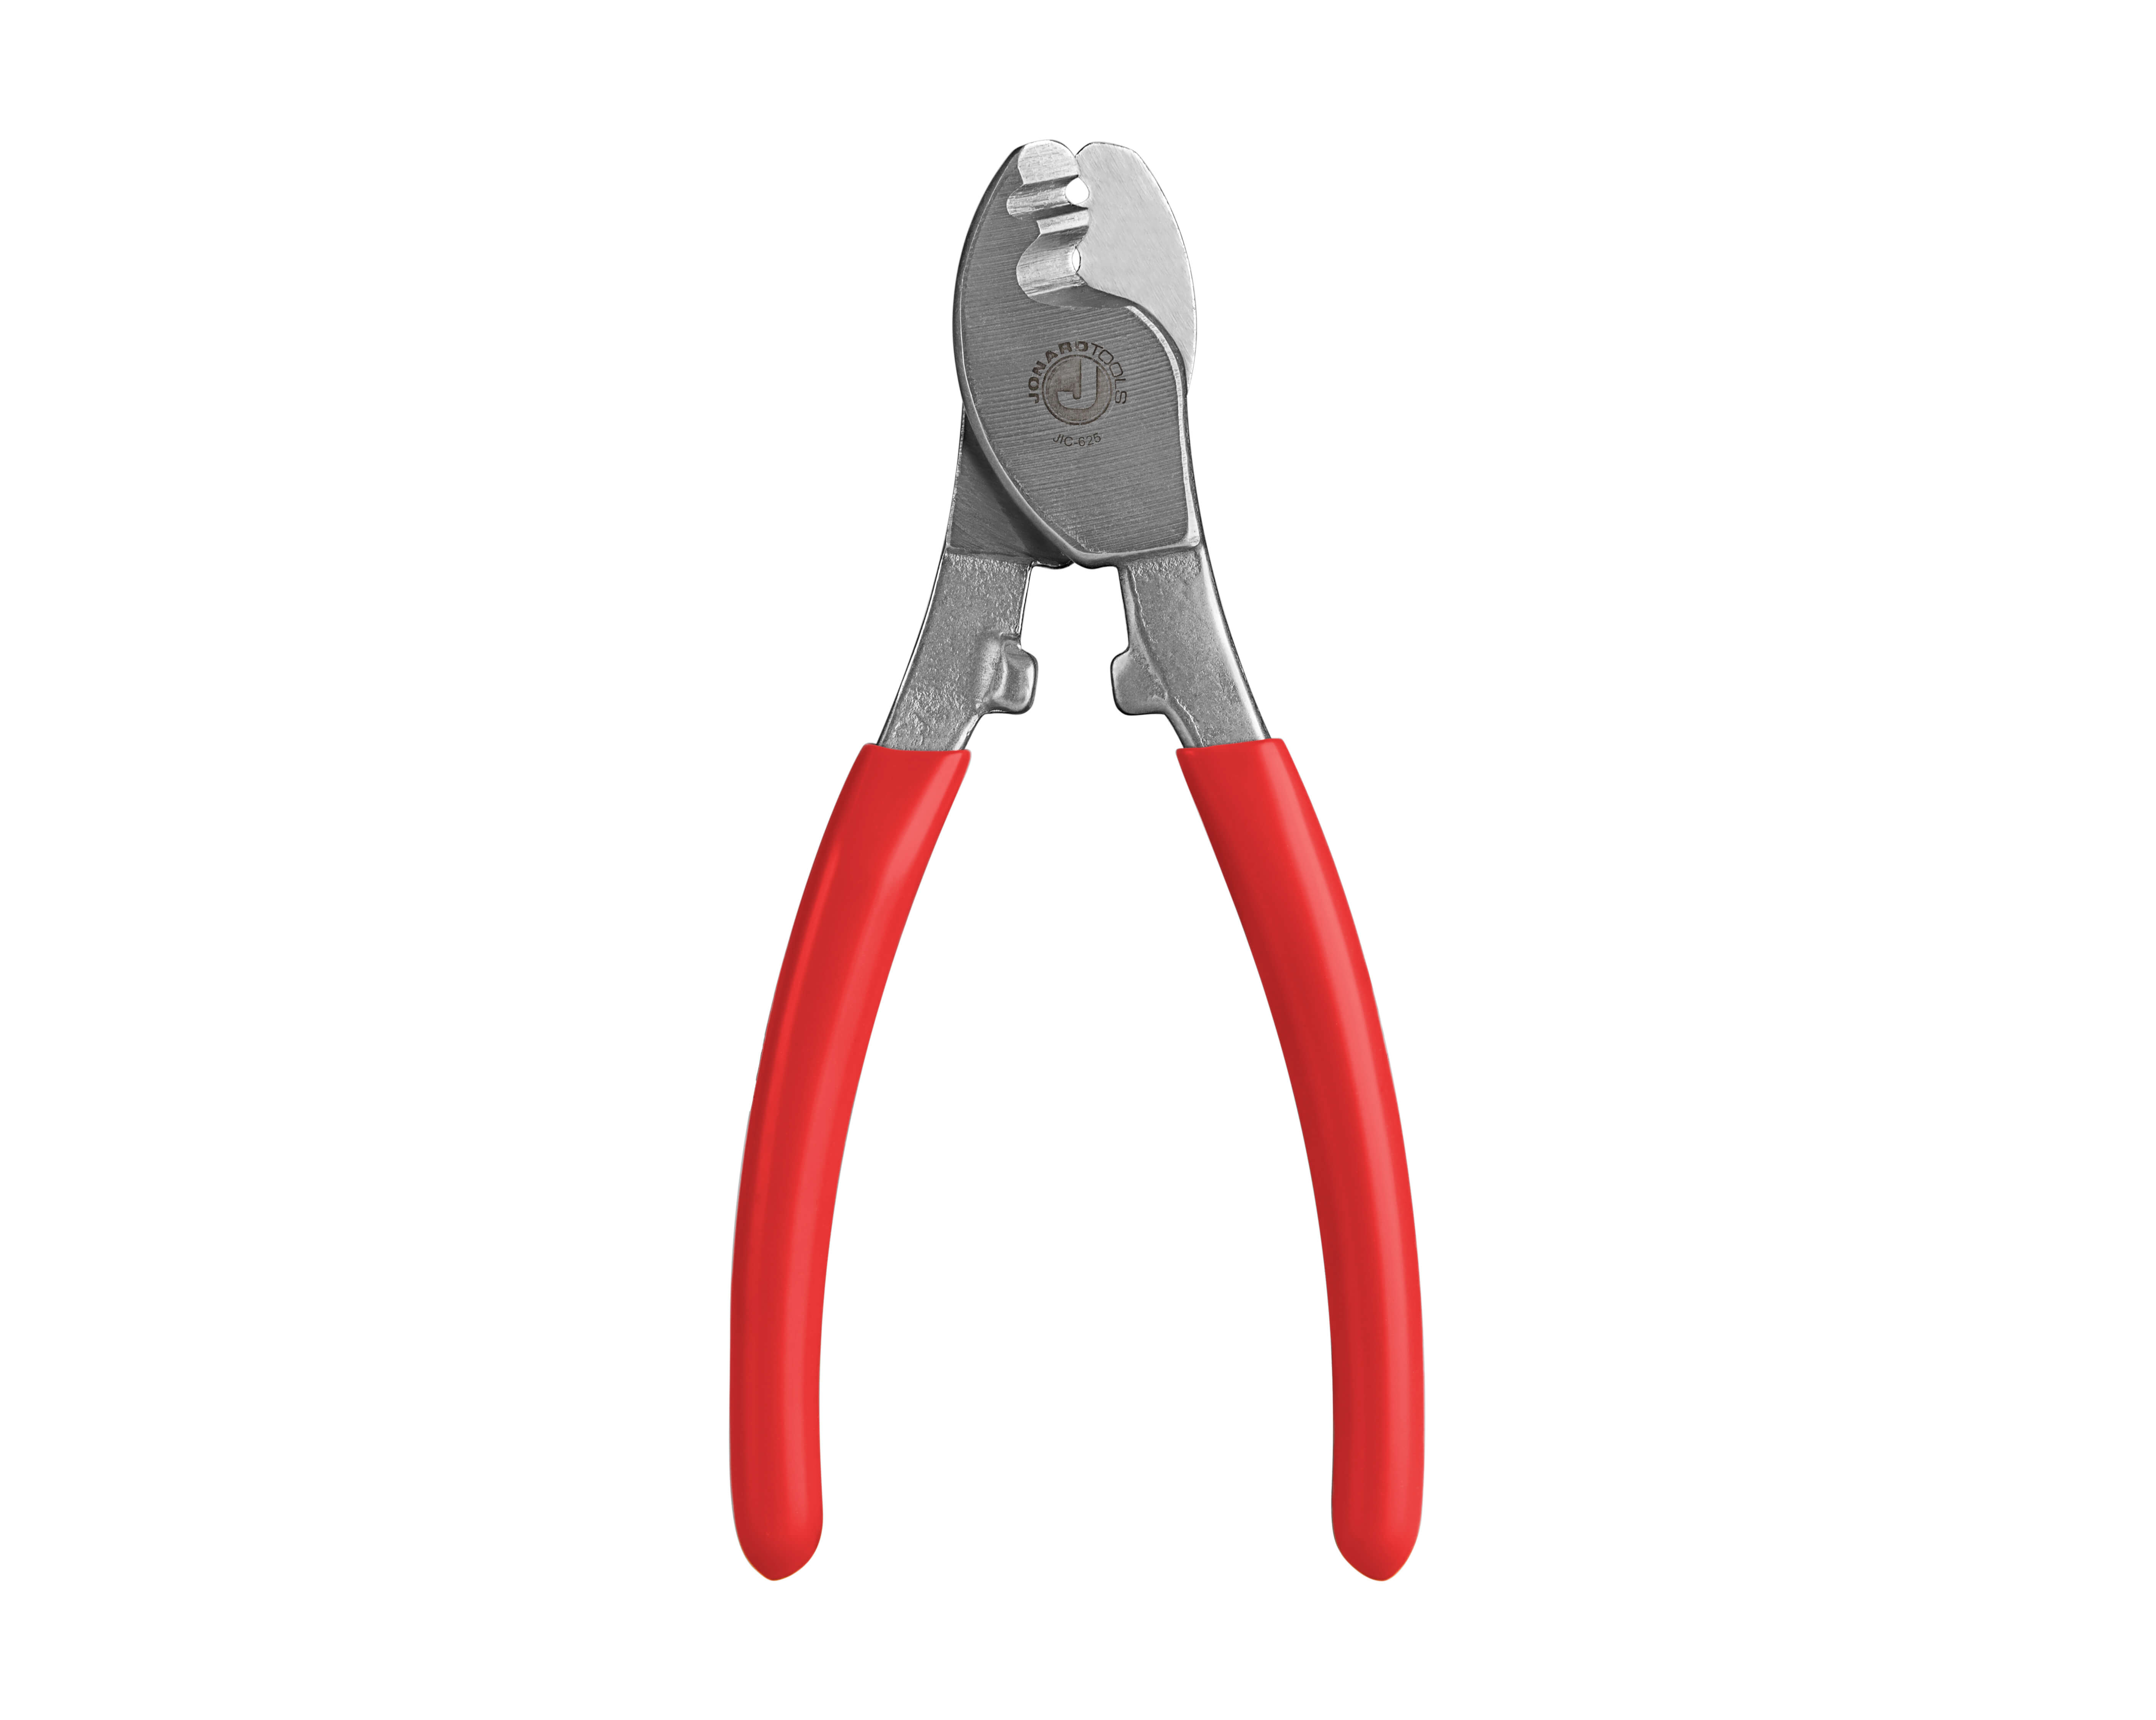 Foarfece si cuttere - Copper Coax And Network Cable Cutter, pro-networking.ro